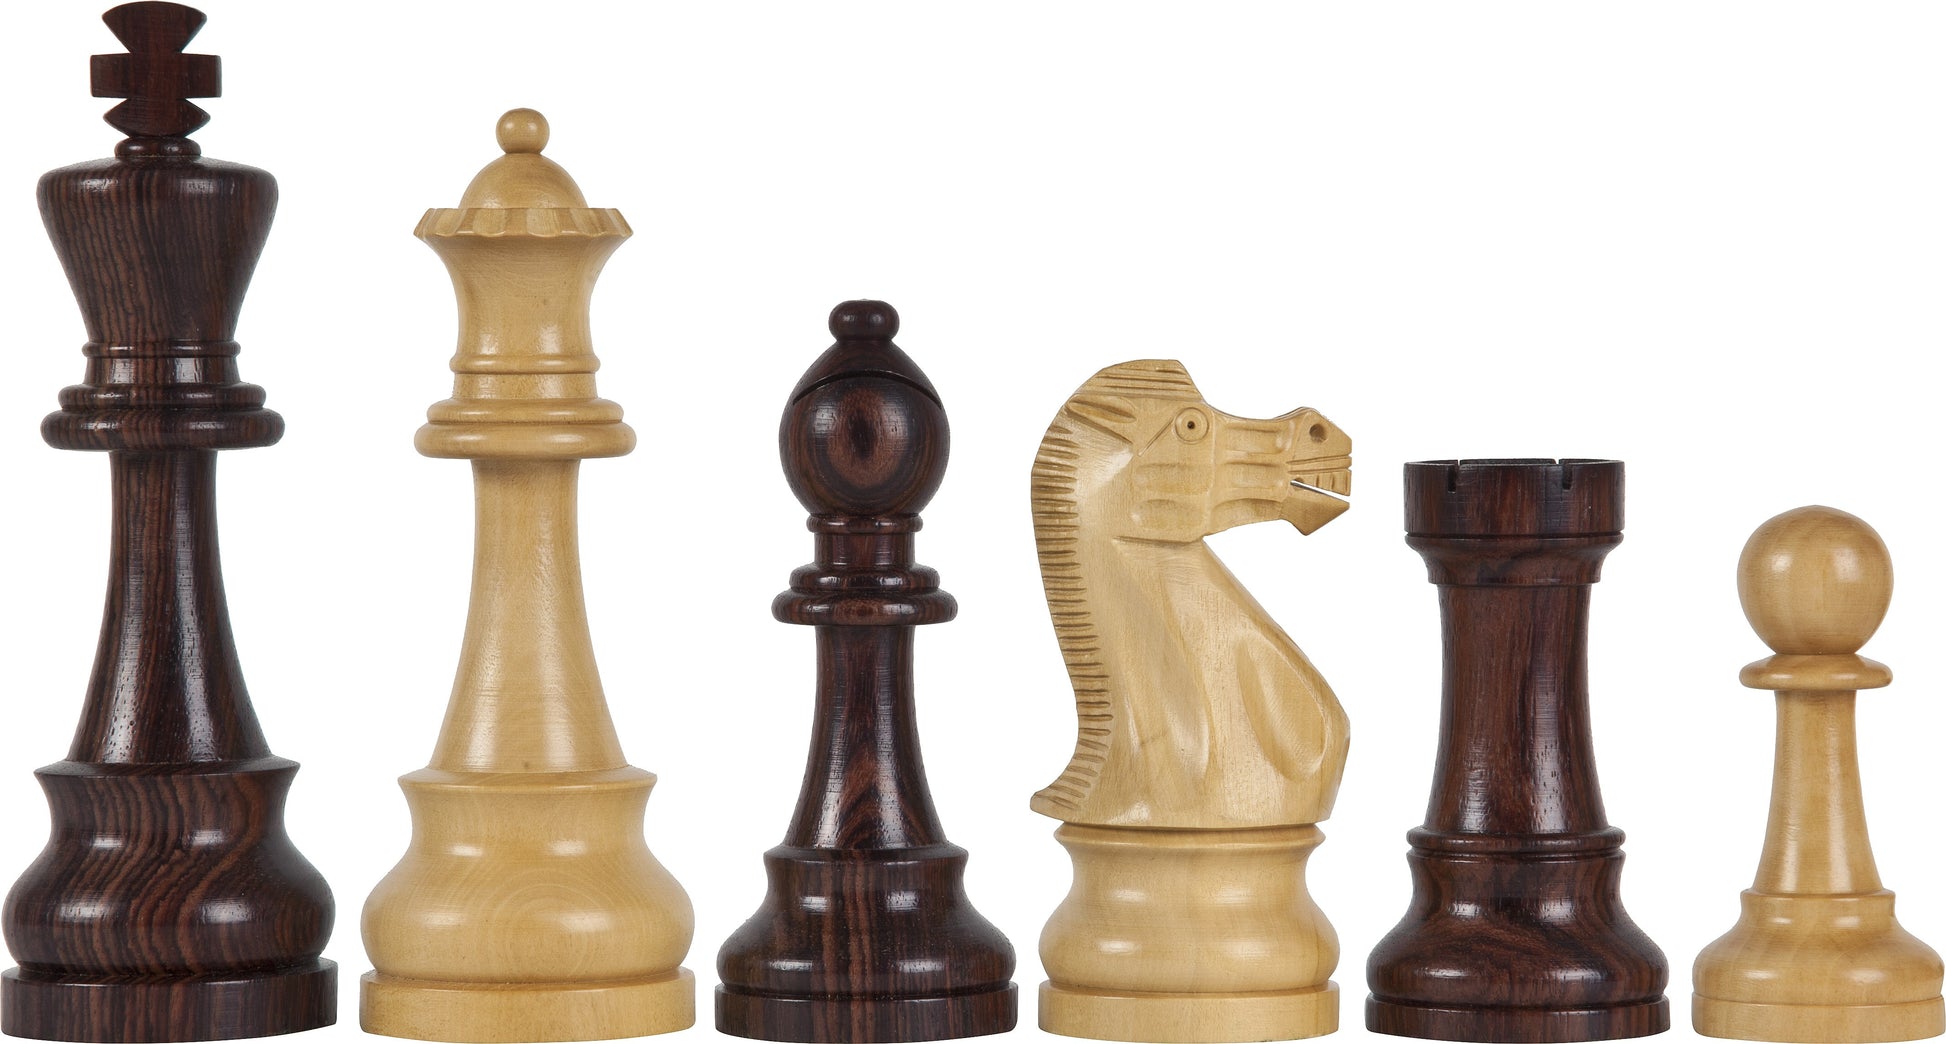 6 inch King of Chess Wood Chess Pieces